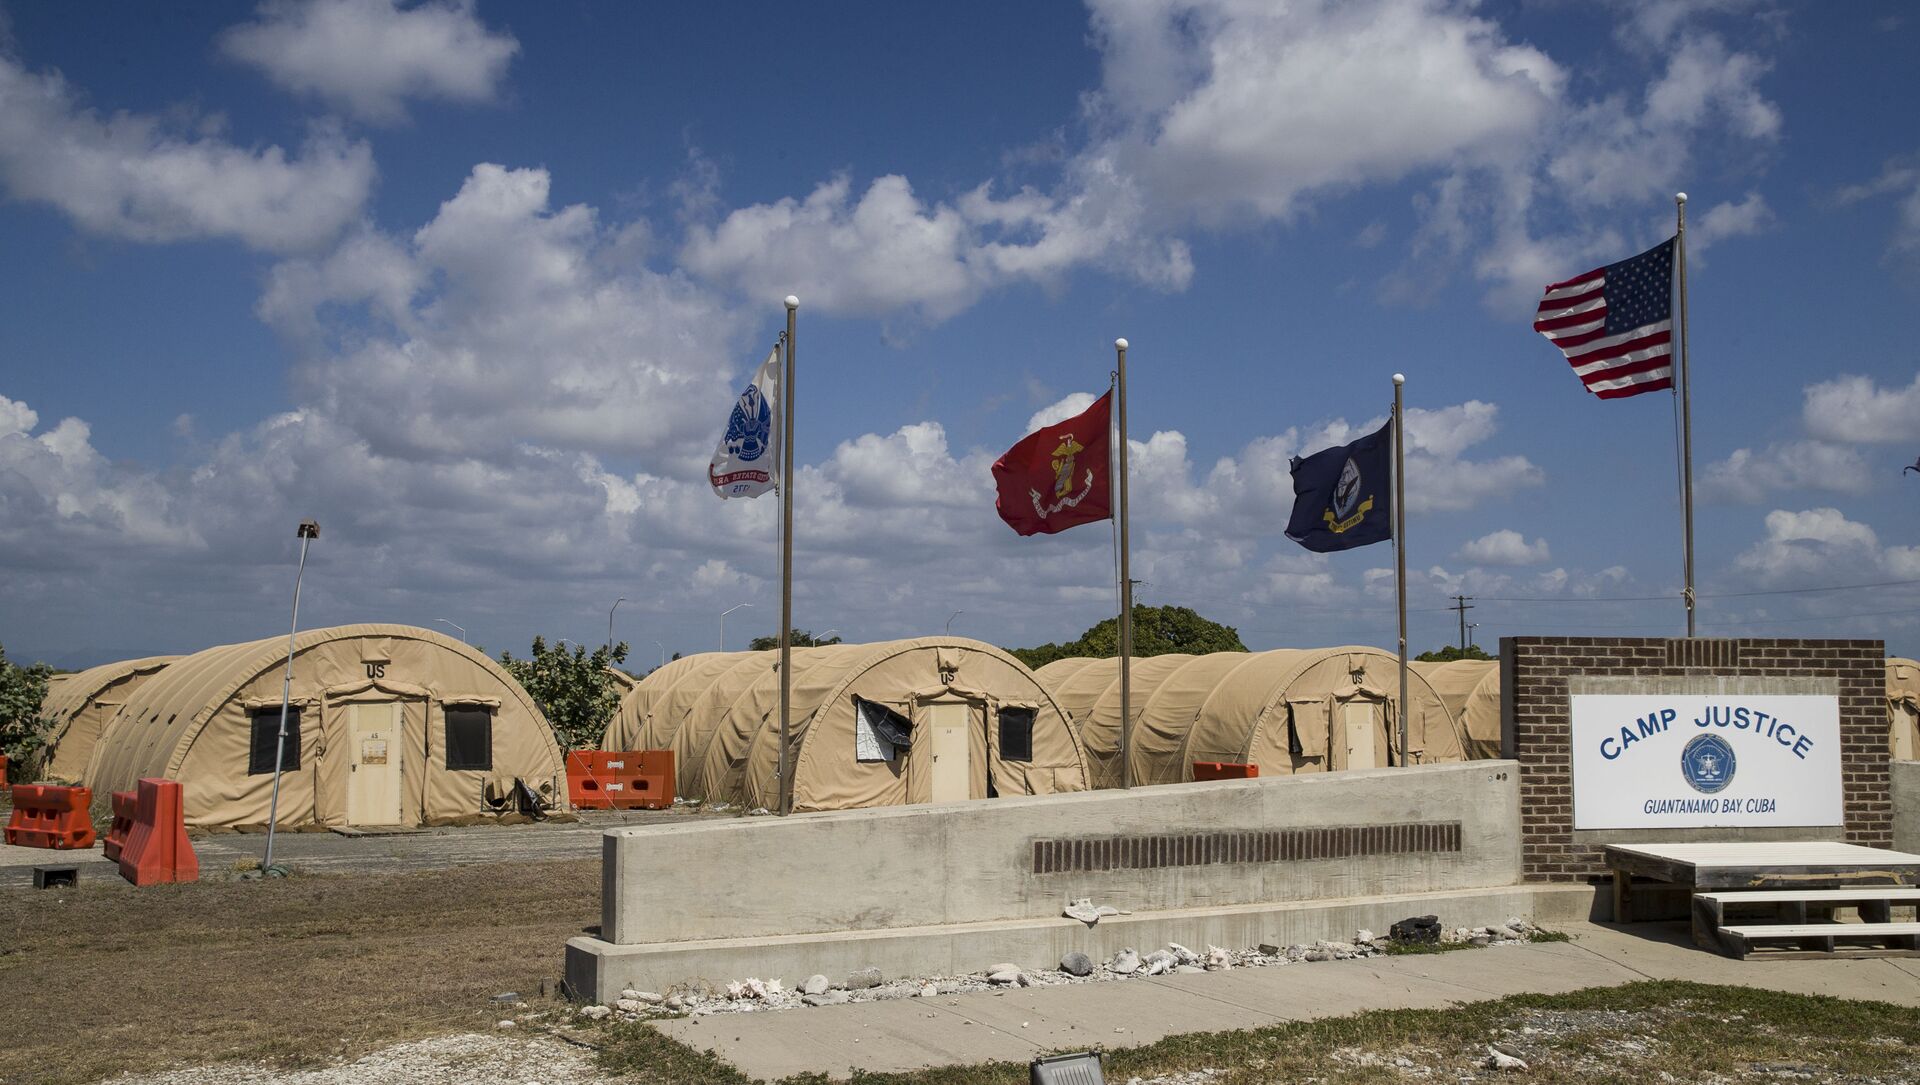 In this April 18, 2019, file photo, in this photo reviewed by U.S. military officials, flags fly in front of the tents of Camp Justice in Guantanamo Bay Naval Base, Cuba. - Sputnik International, 1920, 05.09.2021